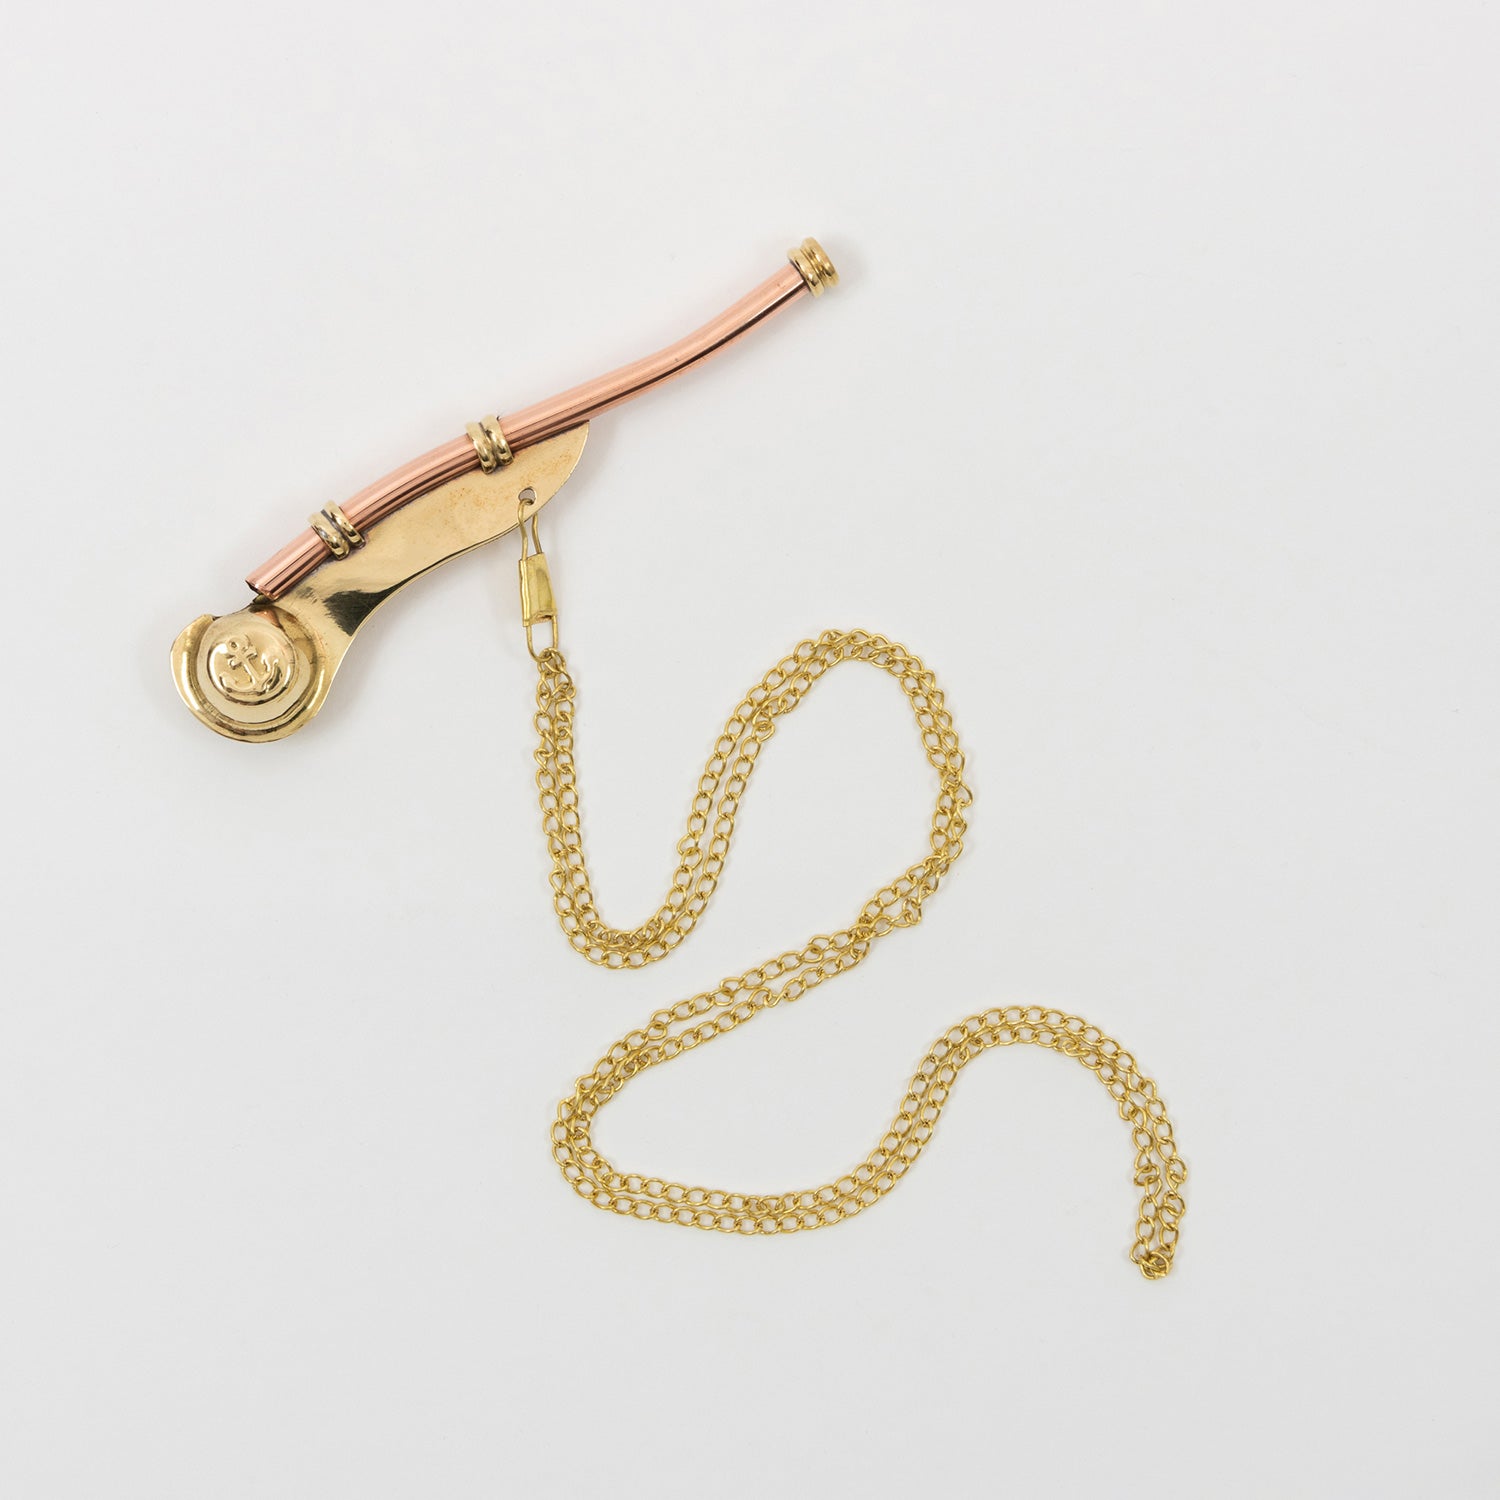 A replica bosun's call comes with a matching 50-inch neck chain and swivel snap-hook. Pictured on a white background.